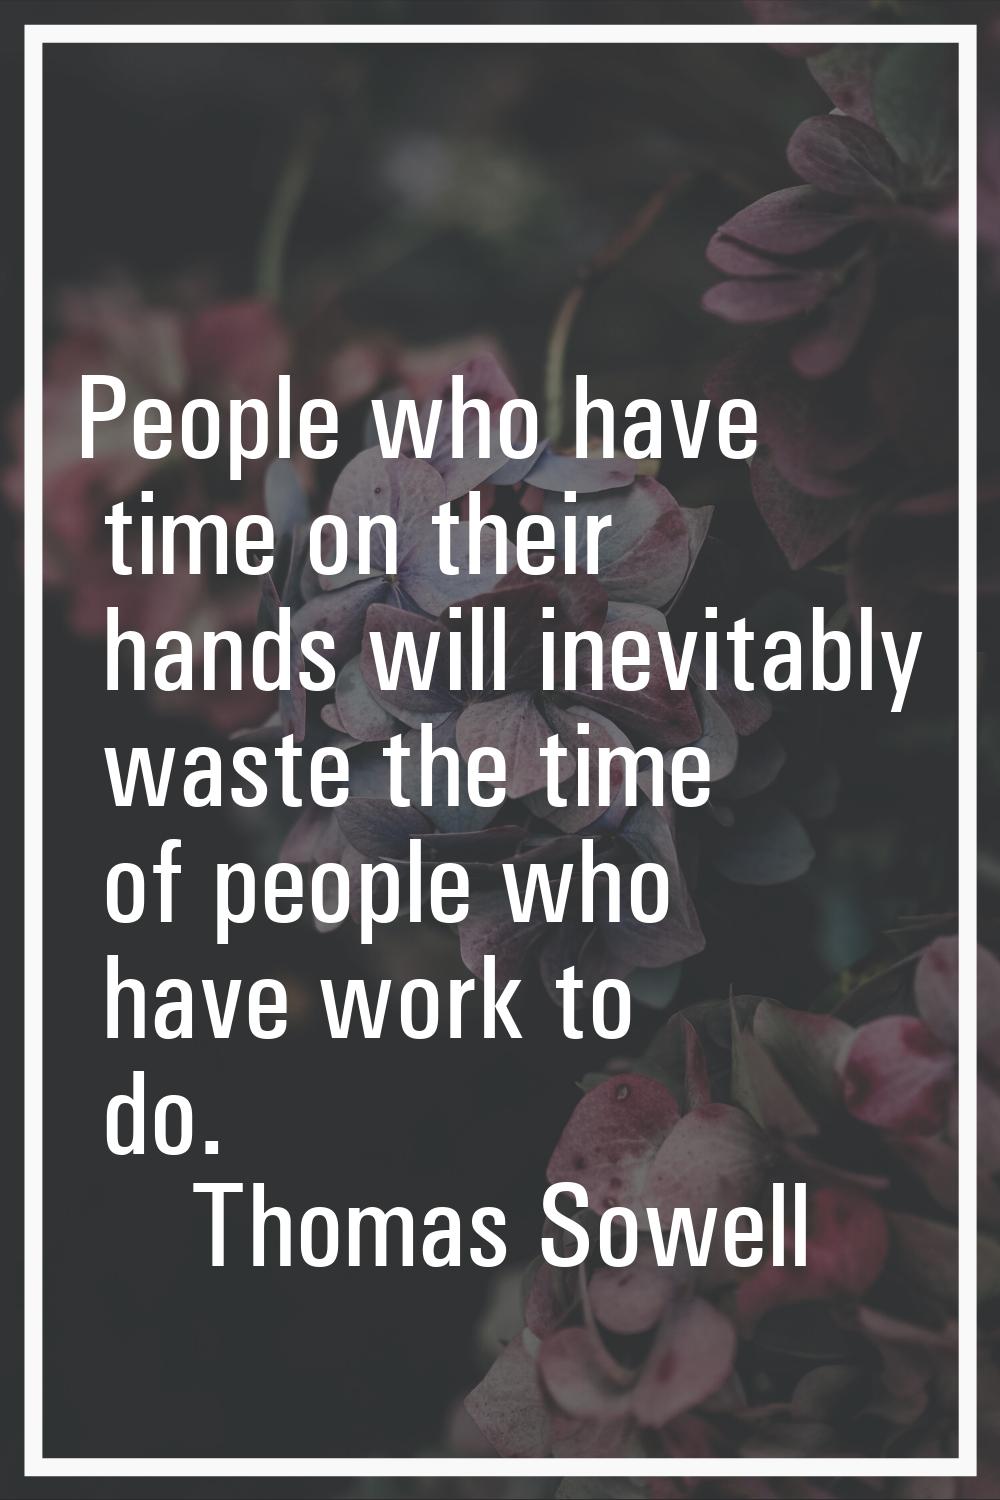 People who have time on their hands will inevitably waste the time of people who have work to do.